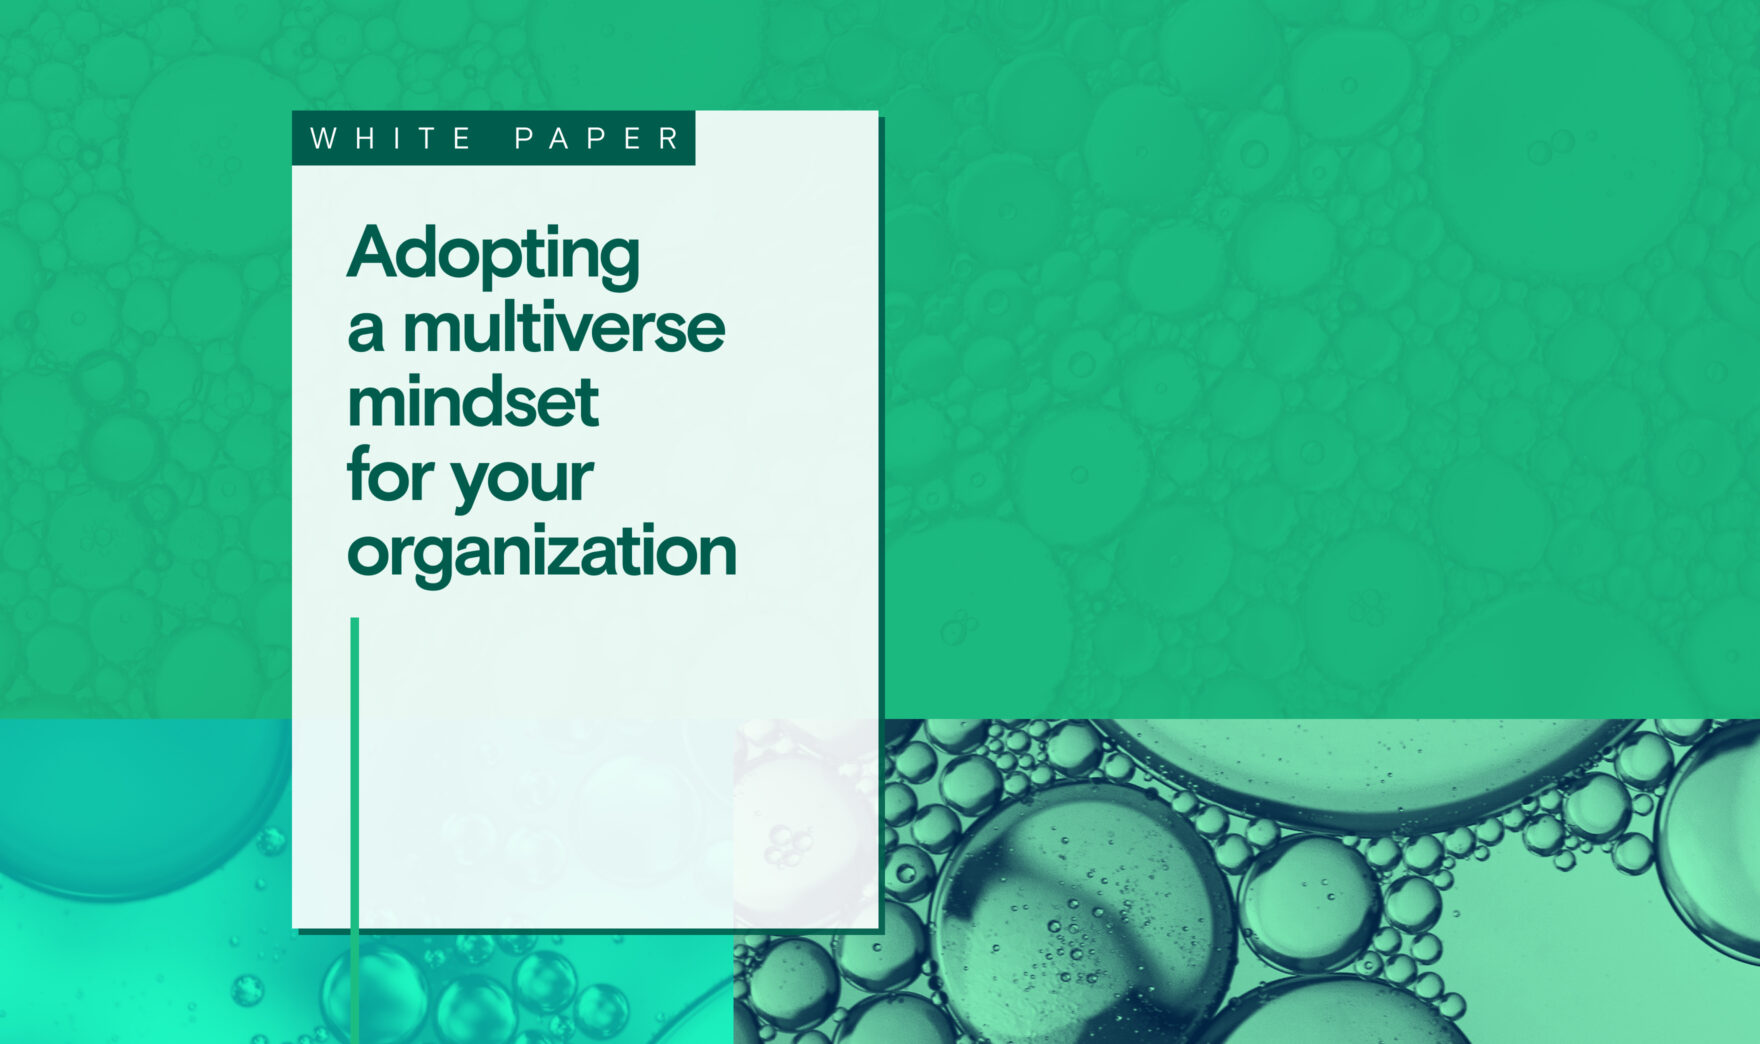 Adopting a multiverse mindset for your organization